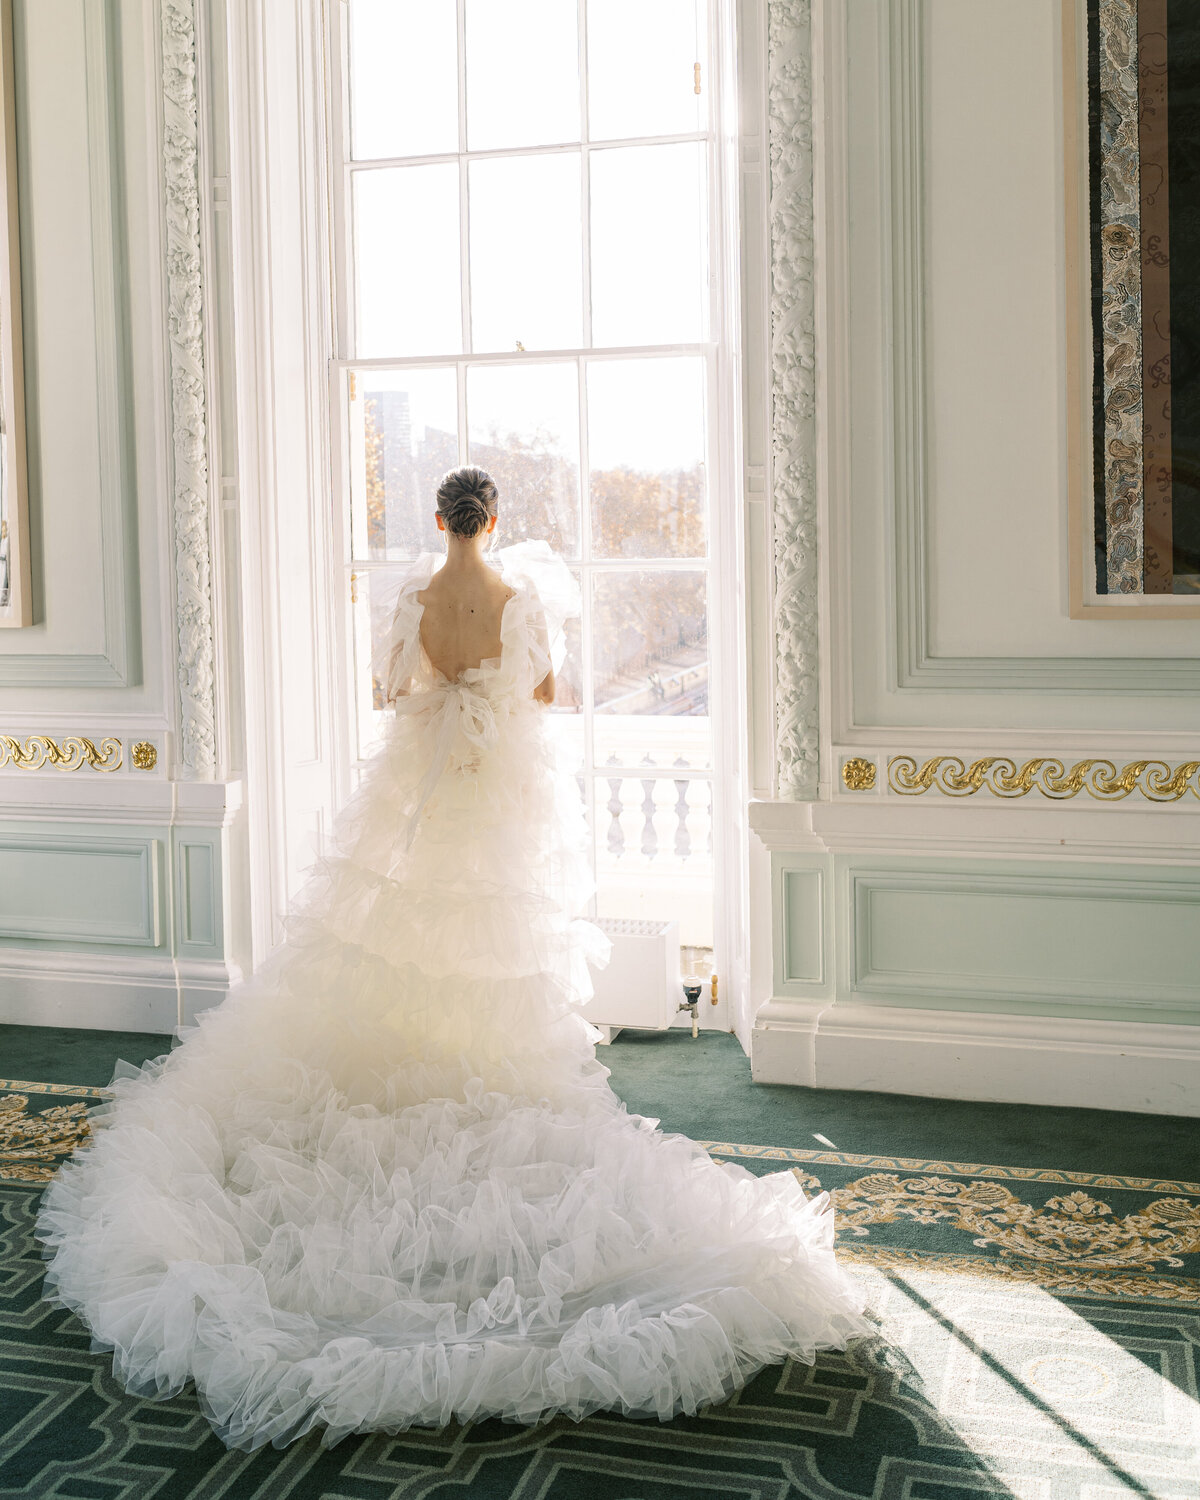 Bride in white tulle wedding dress at London wedding editorial